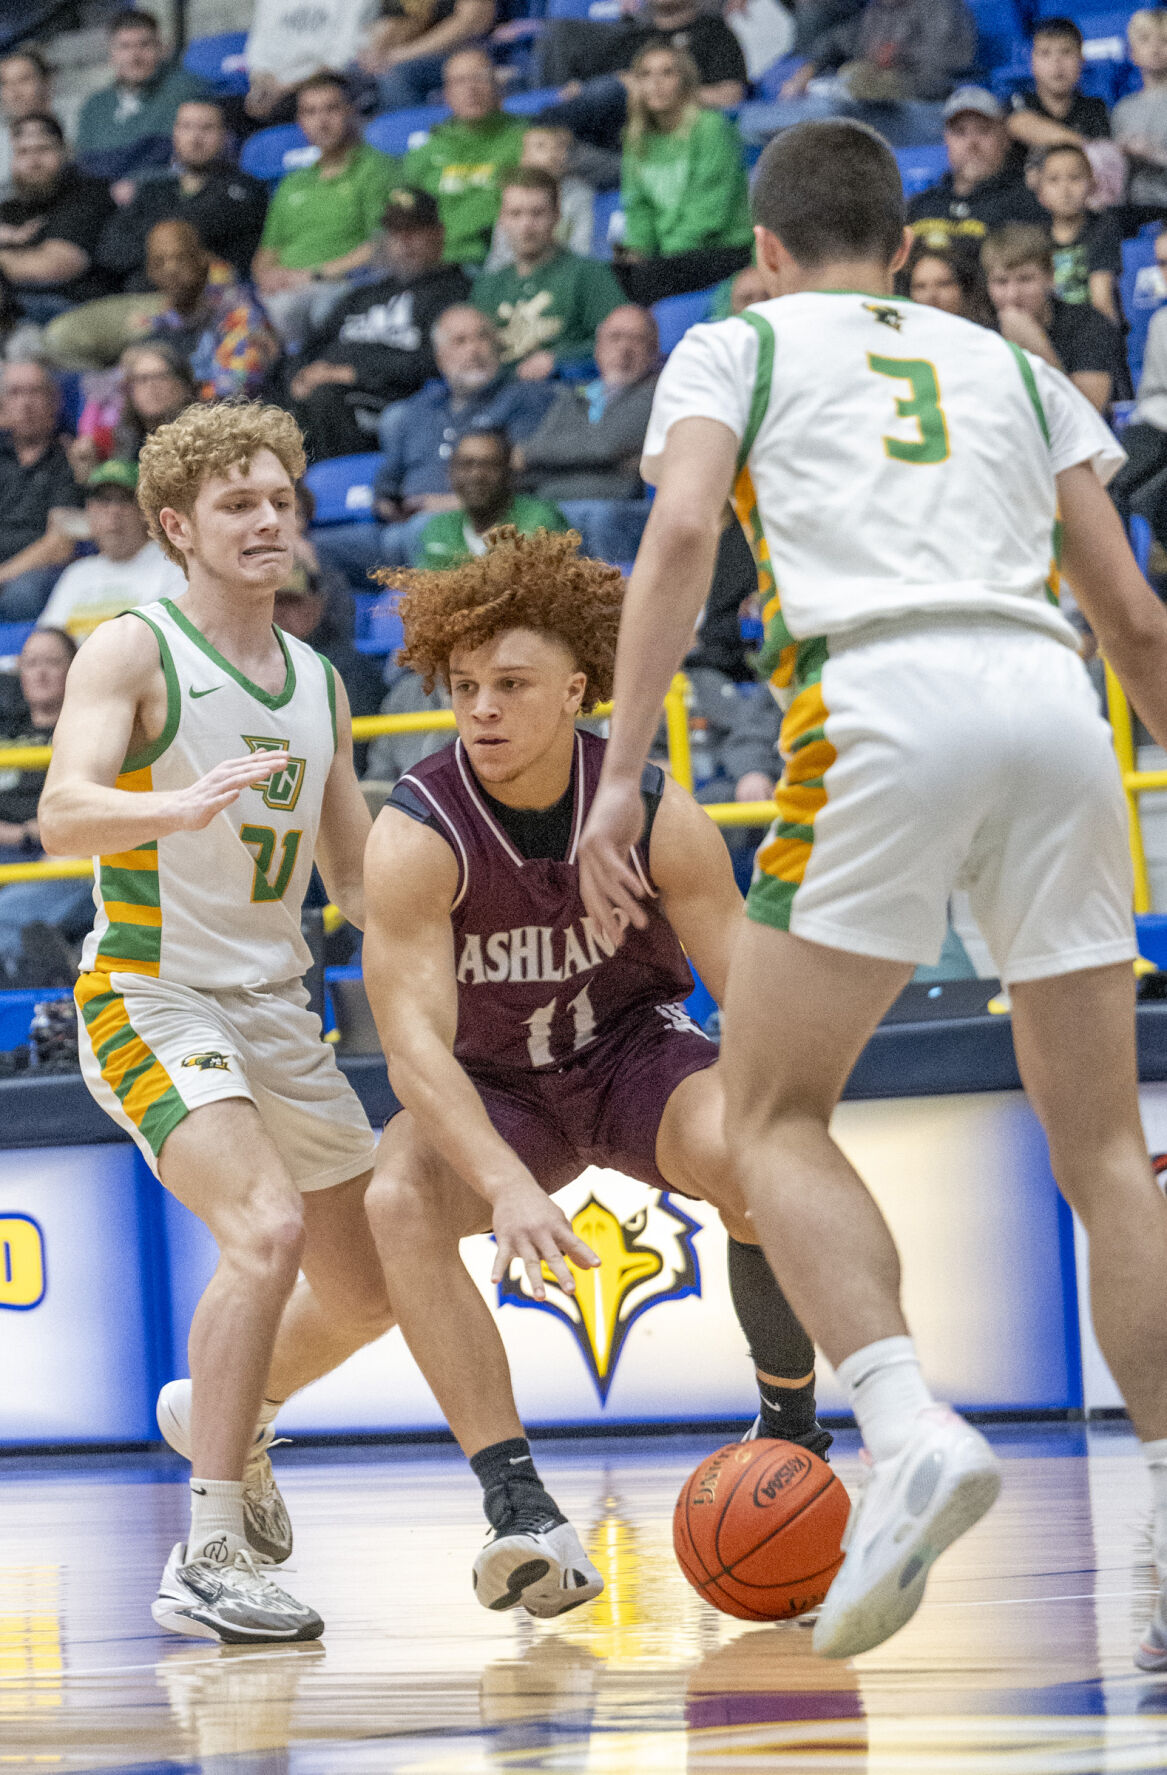 Ashland Blazer’s Defense Powers 77-41 Victory over Greenup County in 16th Region Tournament